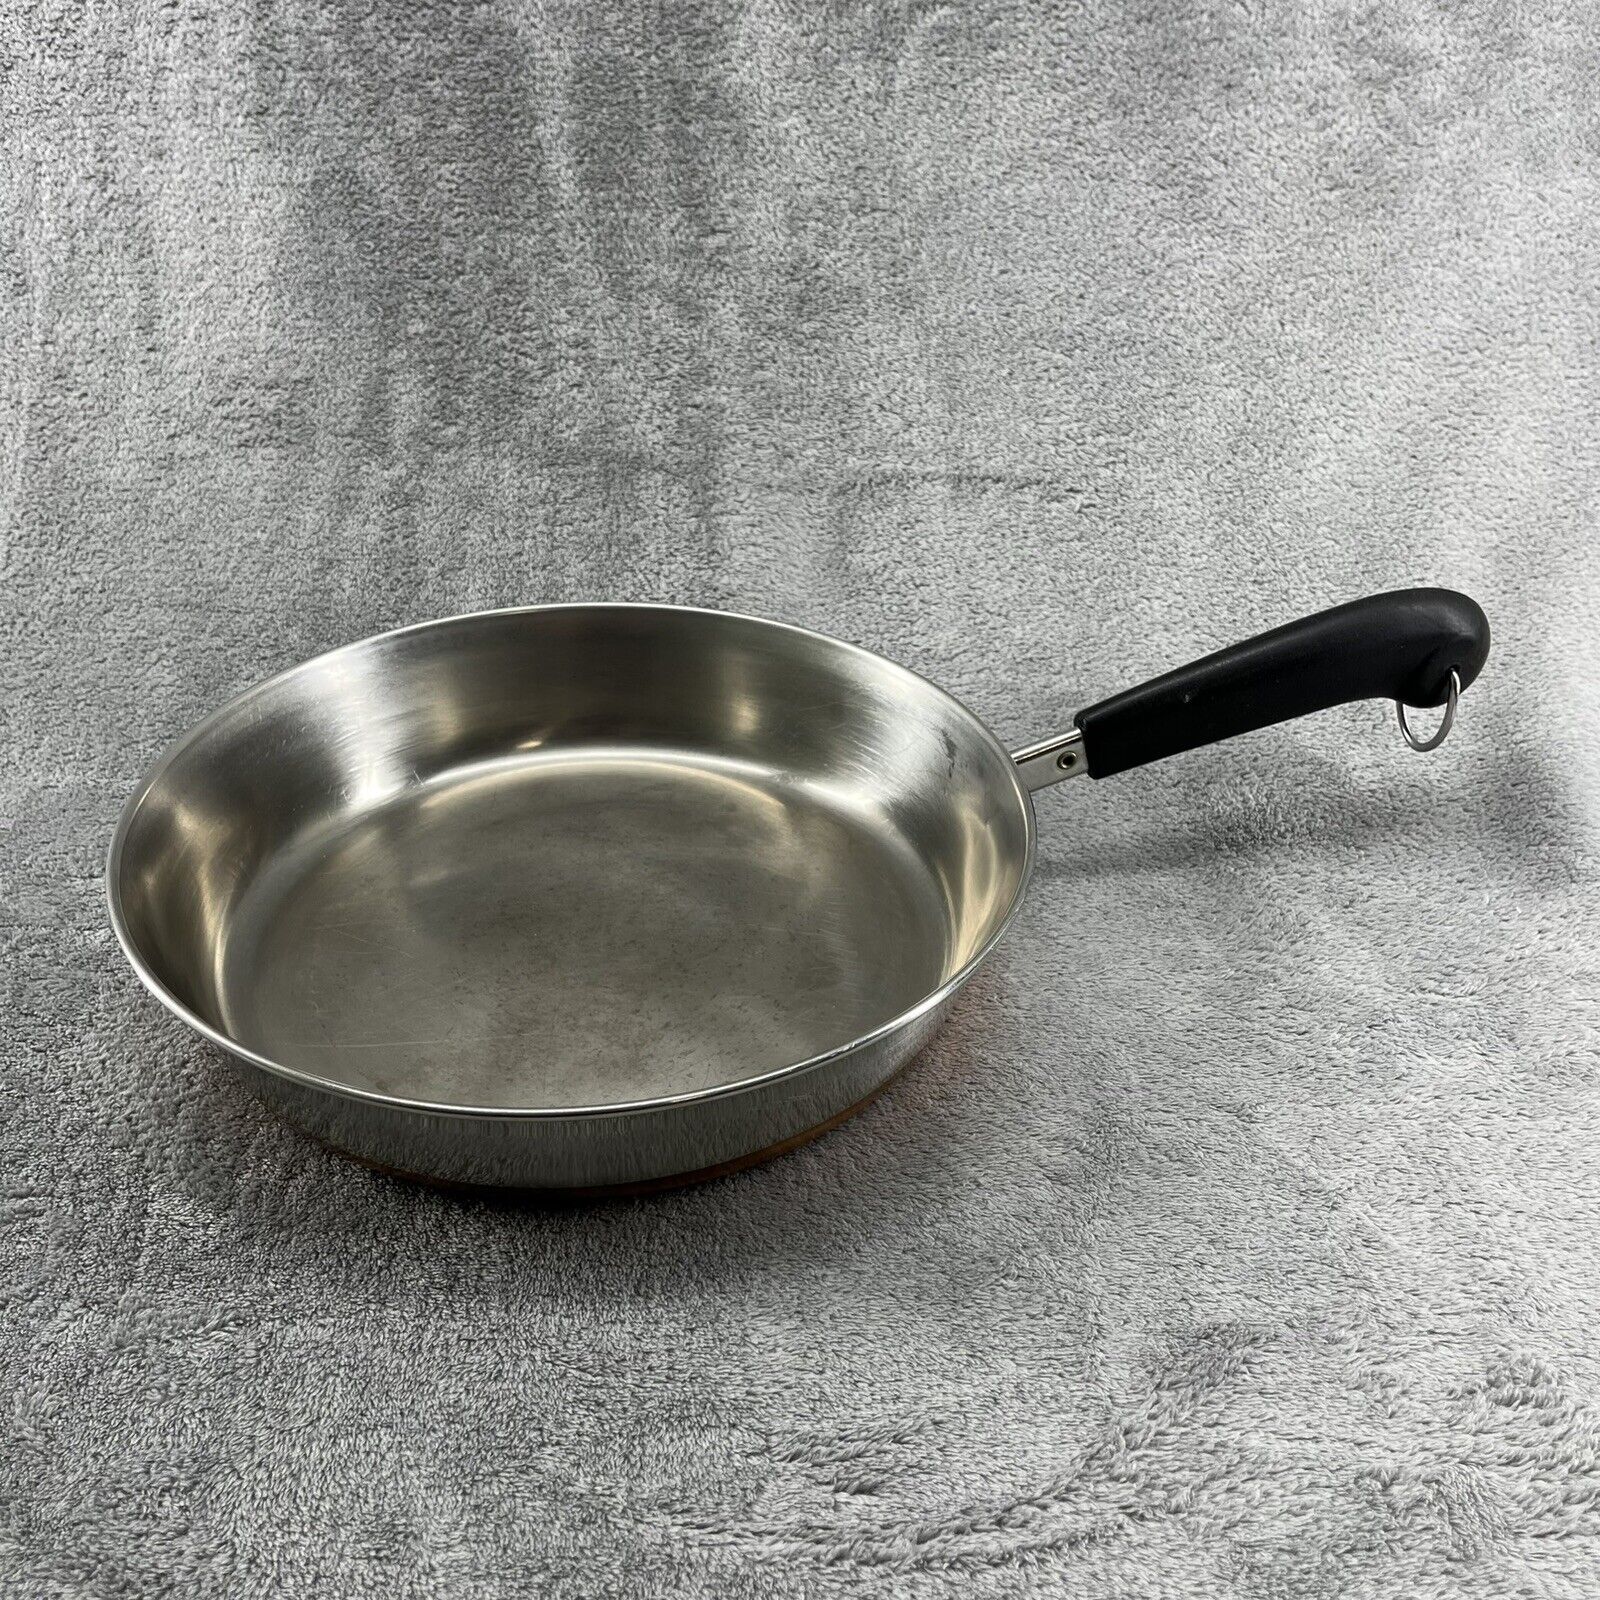 Vintage Revere Ware Skillet Frying Pan 10 Inch Copper Bottom Clinton USA No Lid